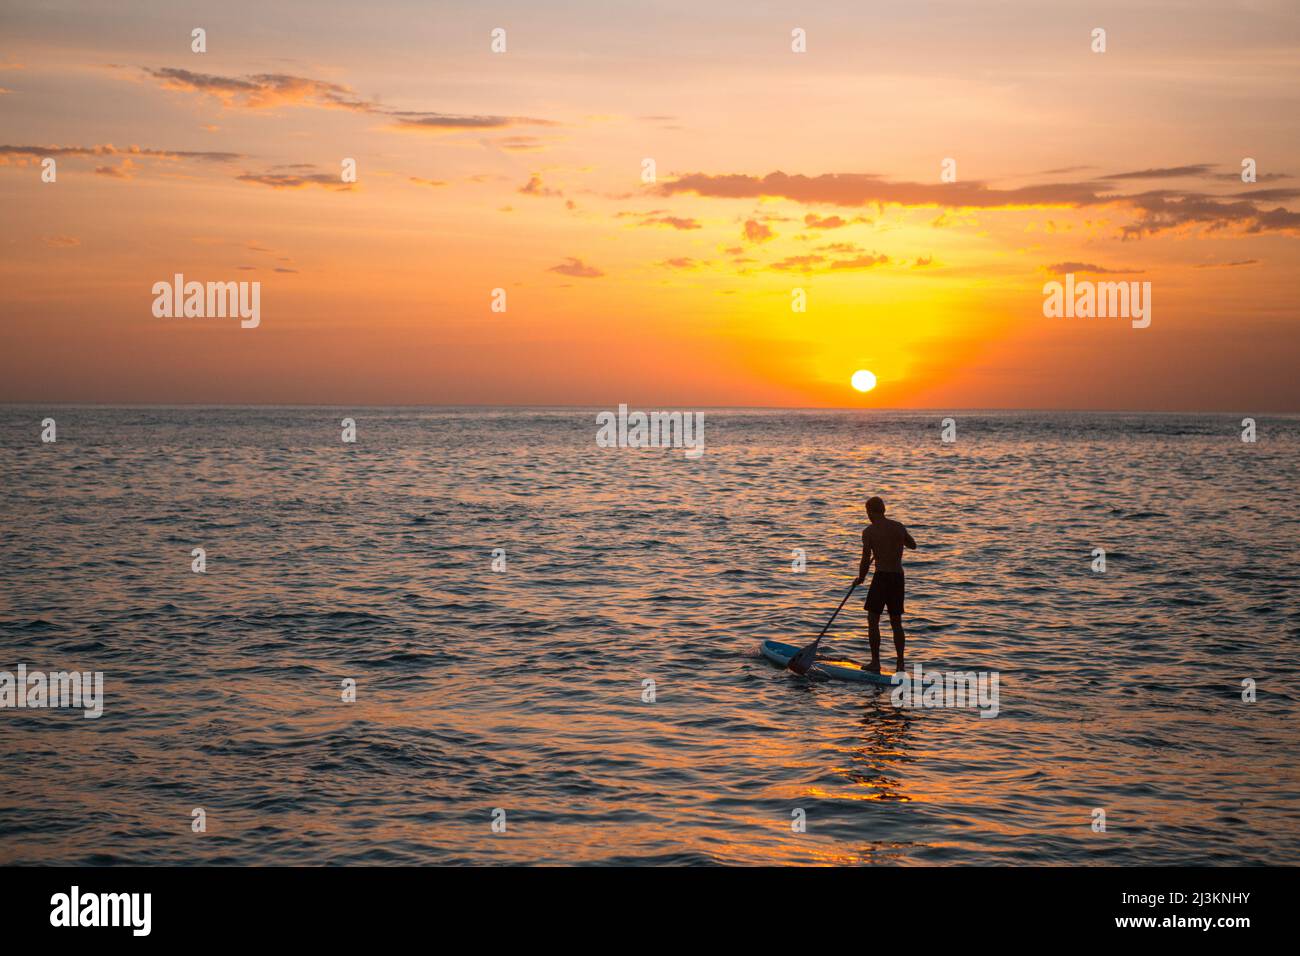 Paddleboarder on the Pacific Ocean at sunset; Cabo San Lucas, Baja California Sur, Mexico Stock Photo